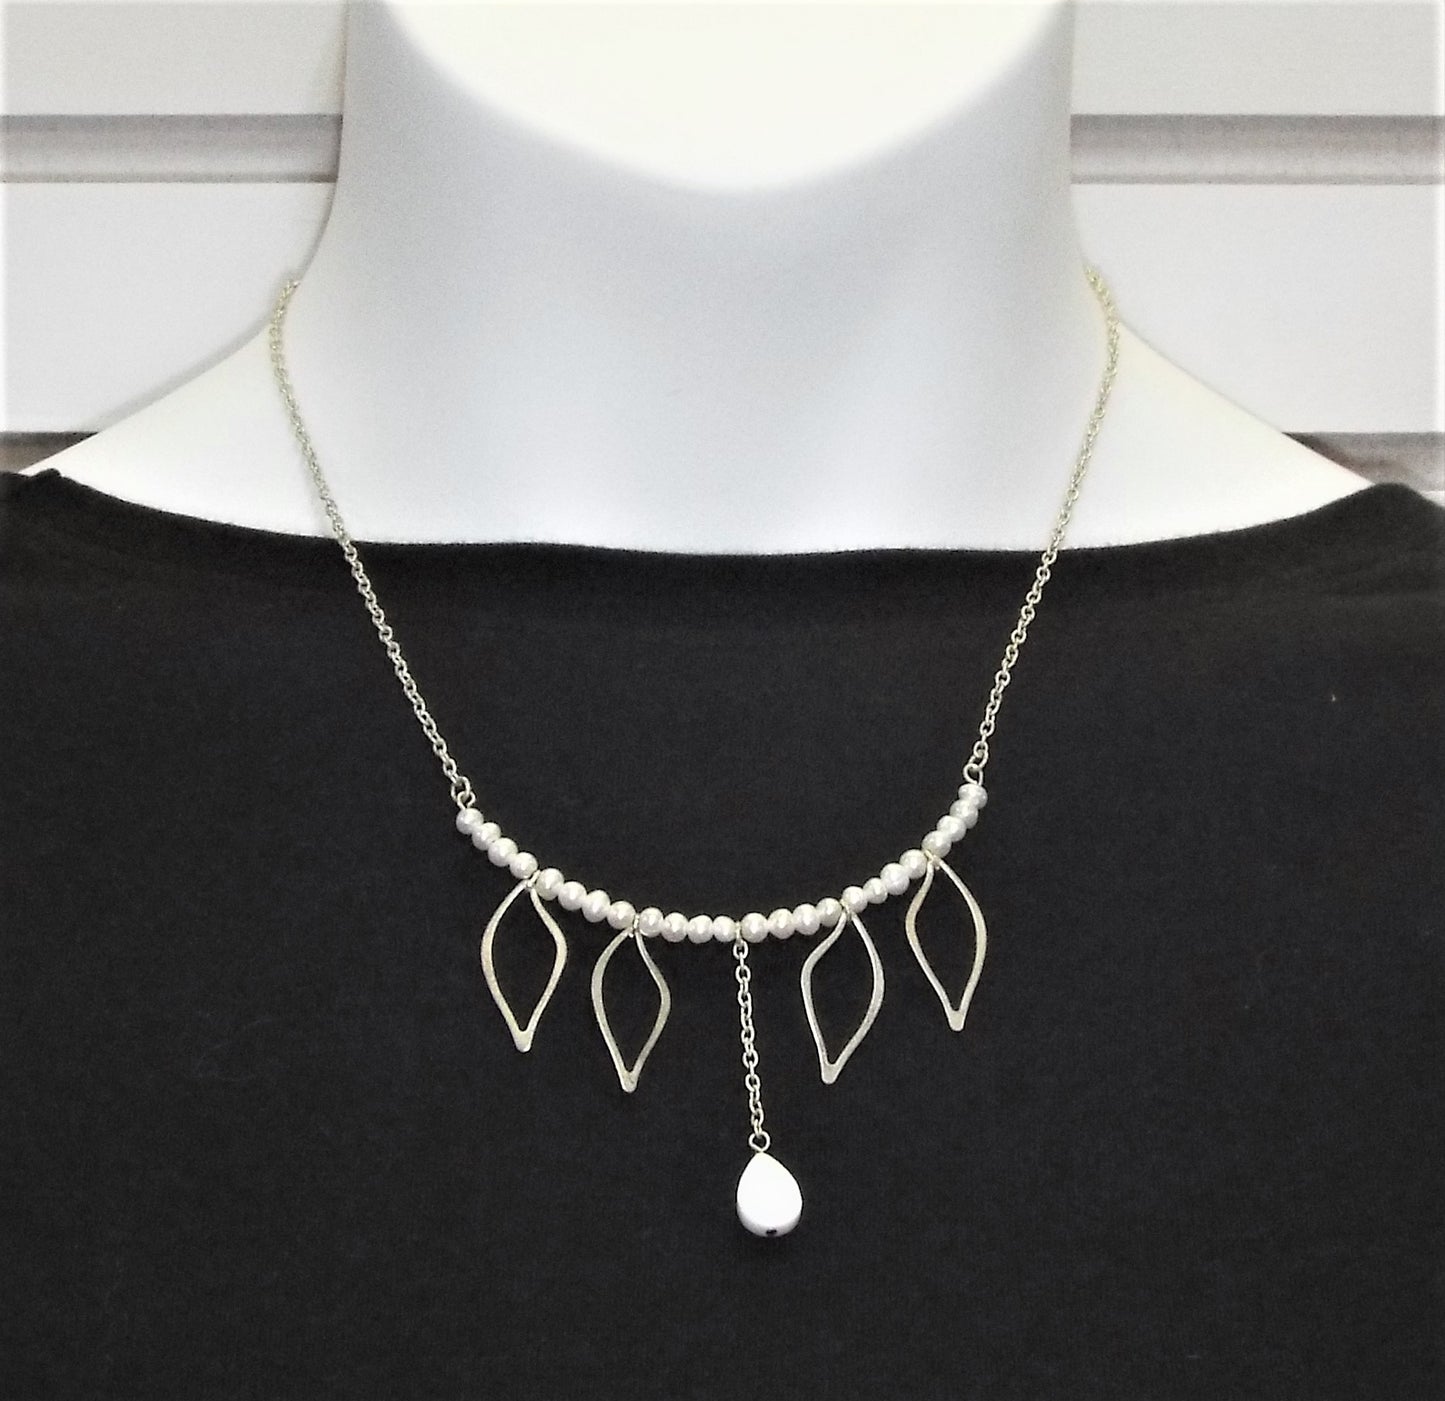 Necklace, Bridal - NEW LOWER PRICE!